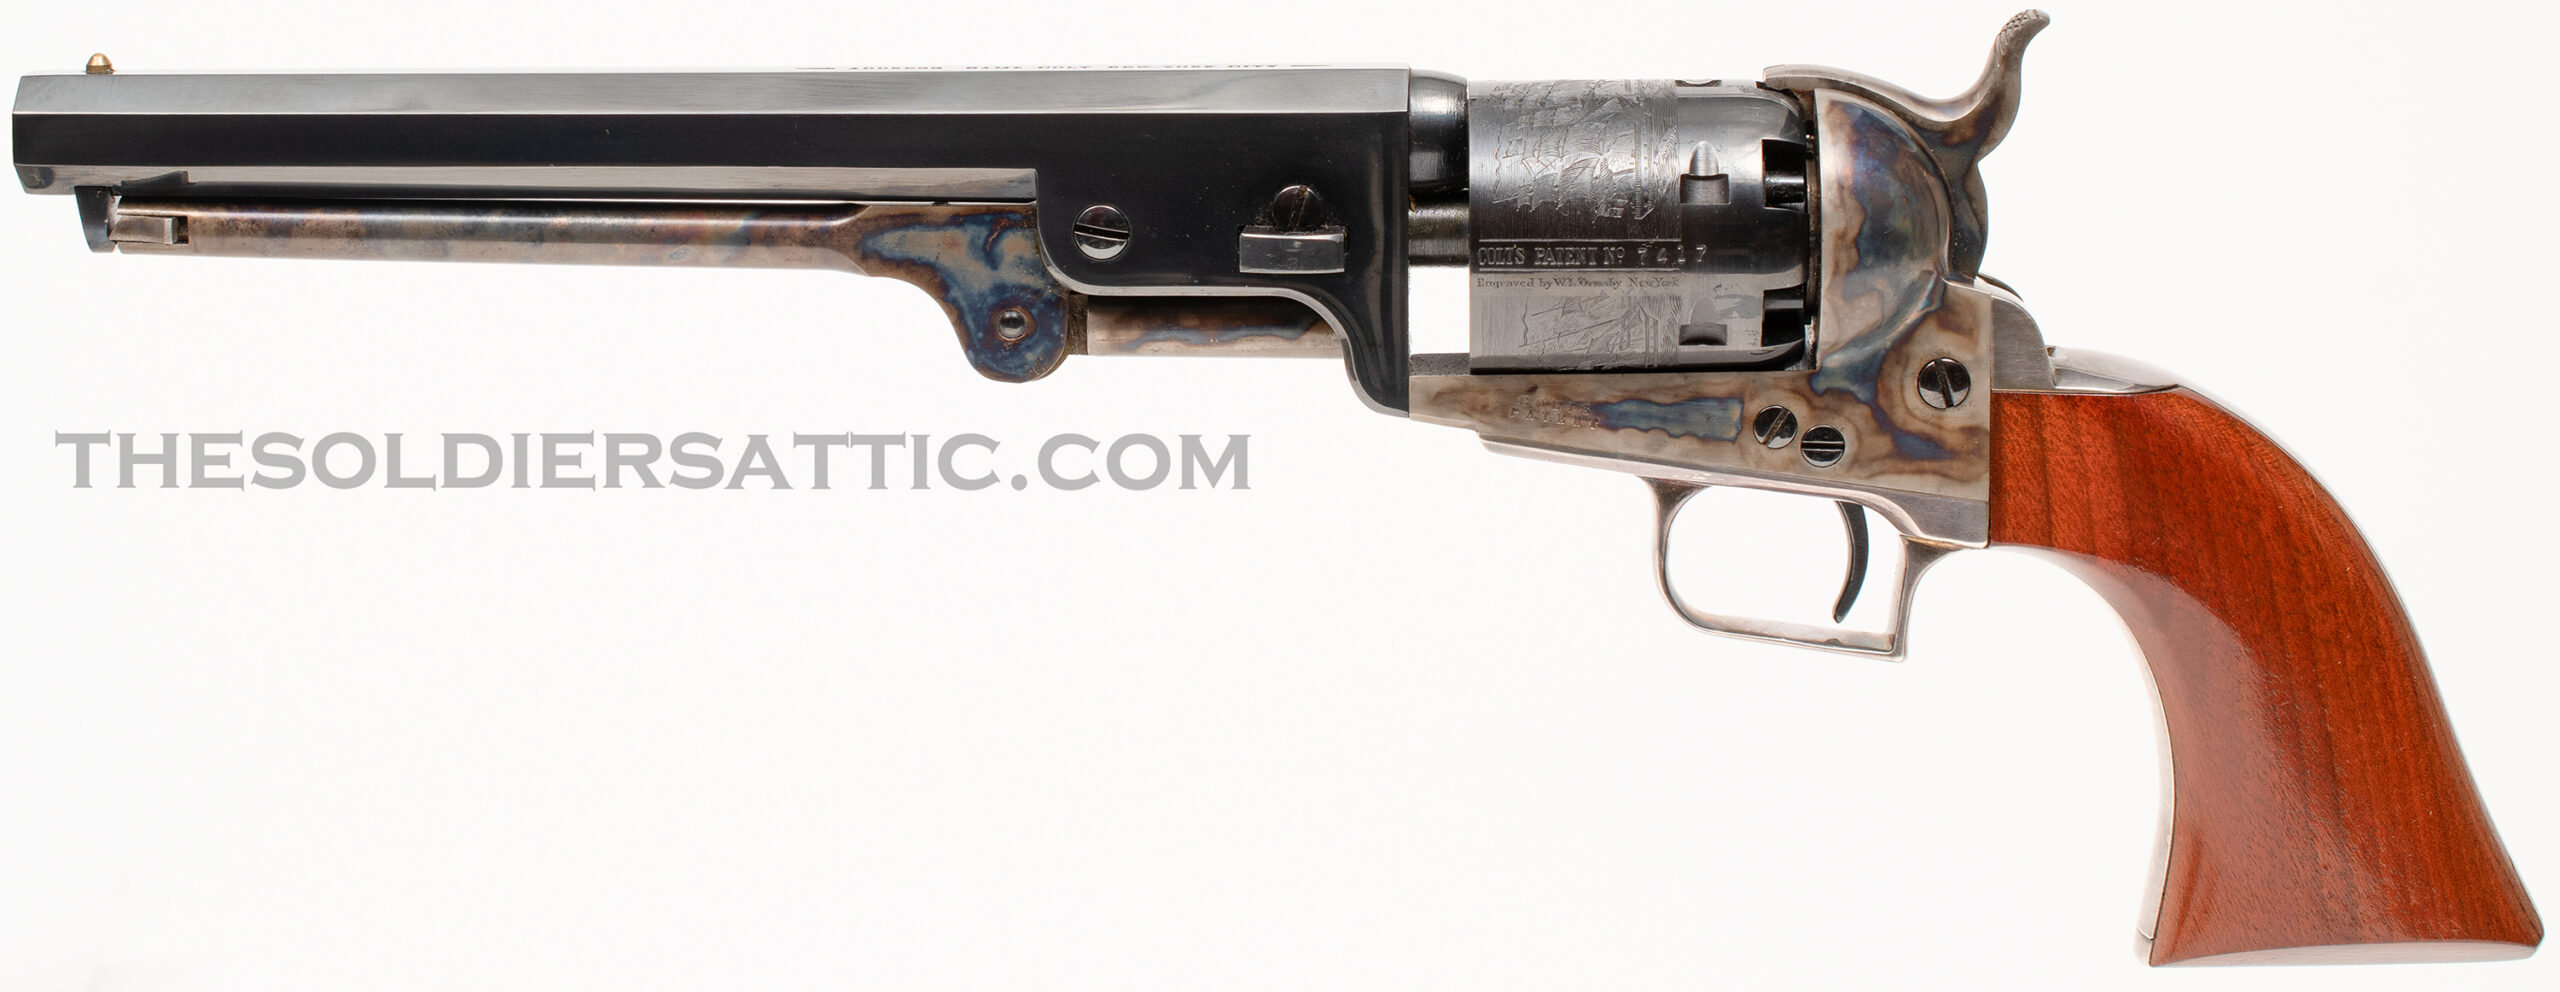 Colt 1851 Navy 2nd Generation Percussion Revolver, cased - The Soldiers ...